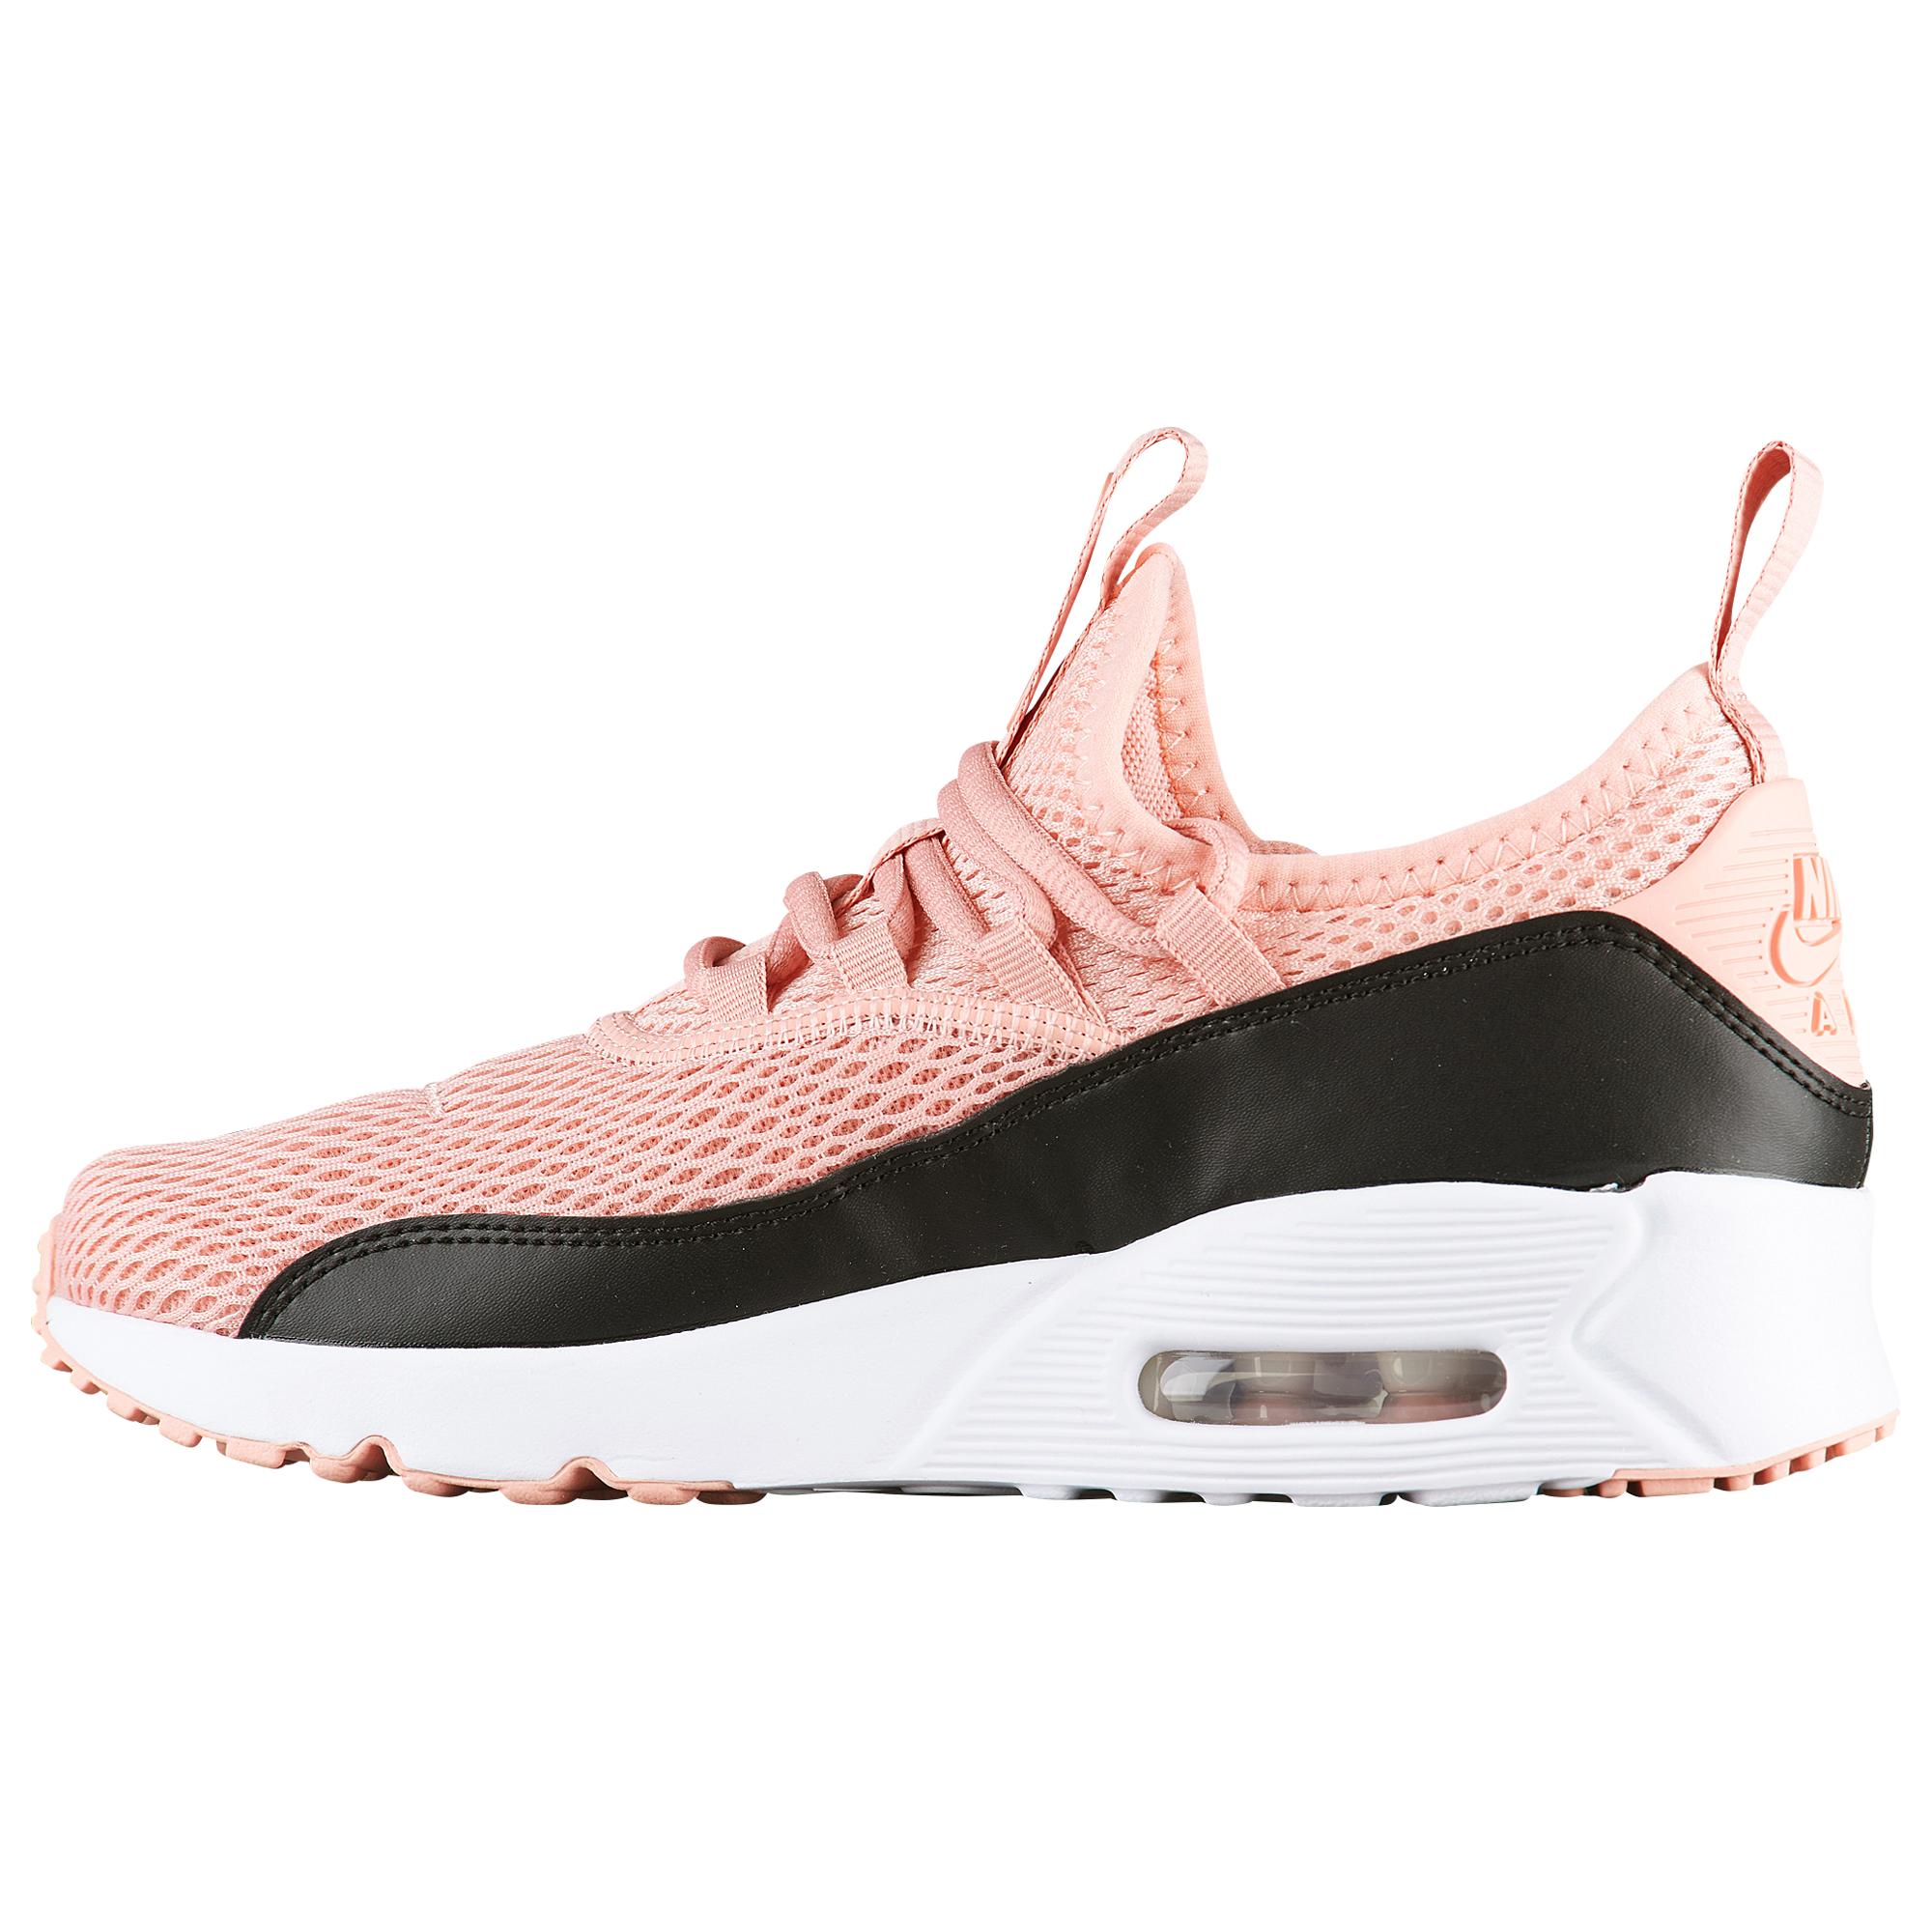 Nike Leather Air Max 90 Ez Running Shoes - Lyst